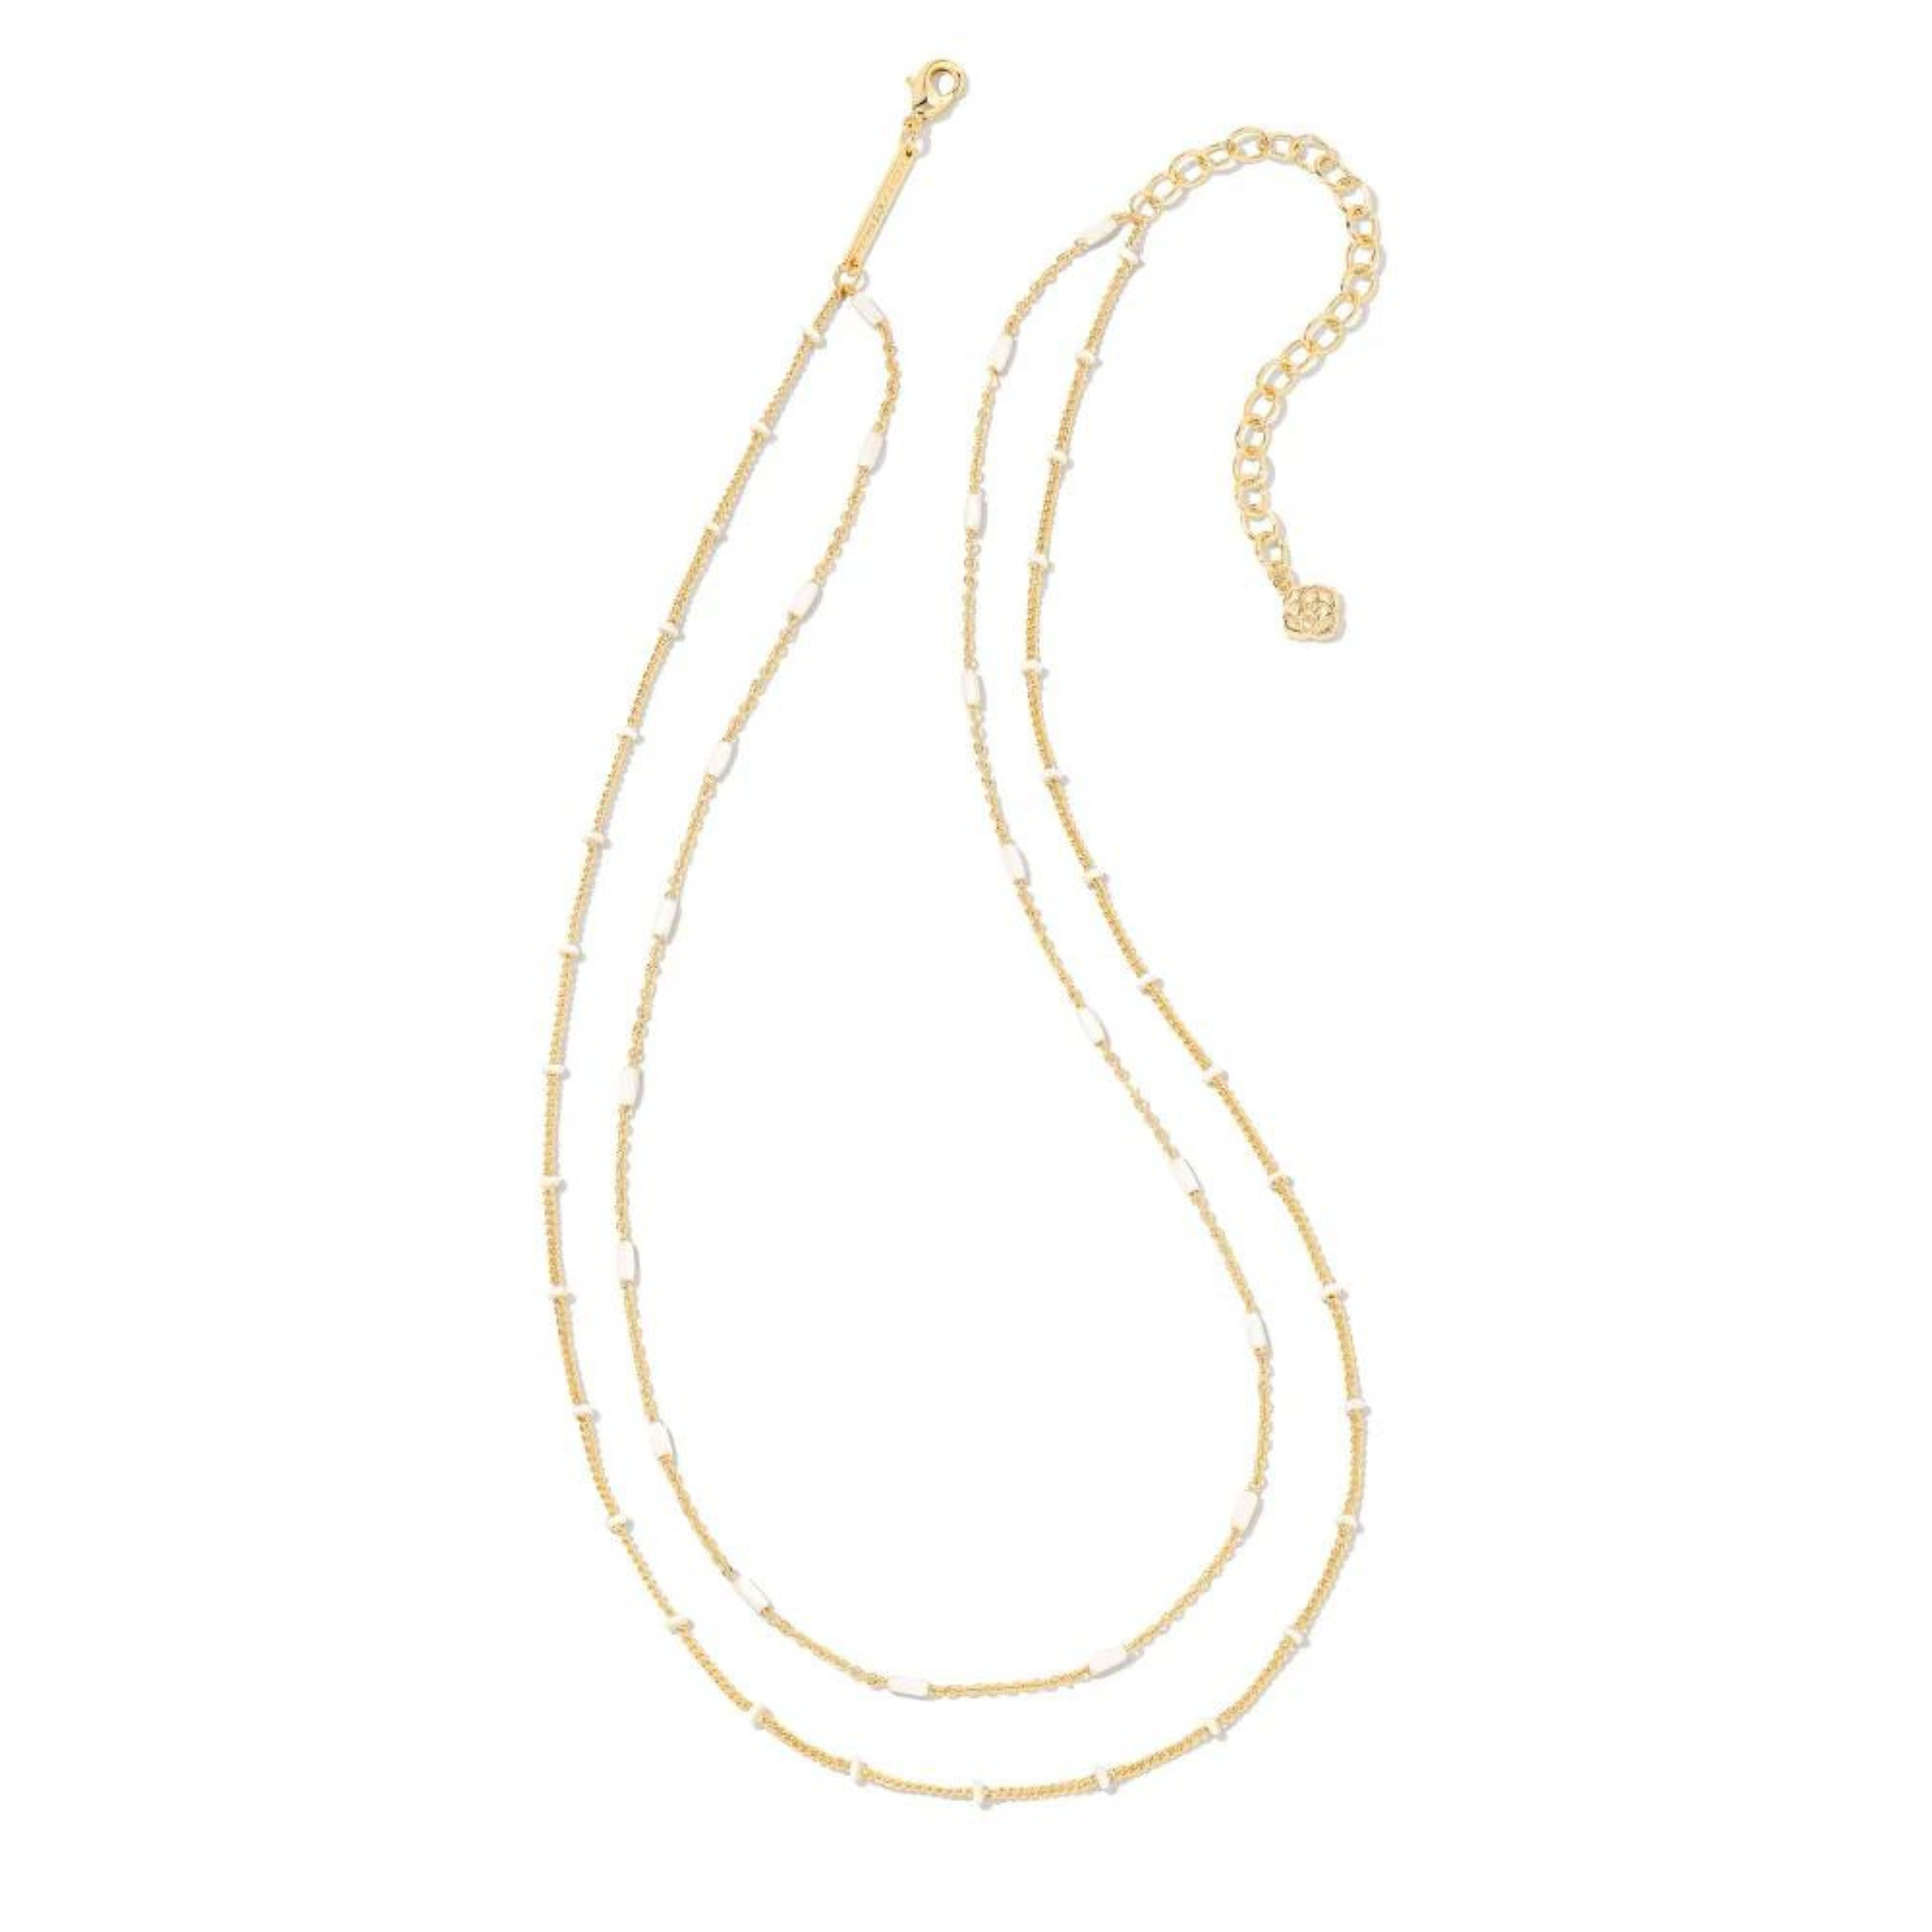 Two strand, adjustable chain necklace with white enamel spacers. This necklace is pictured on a white background. 